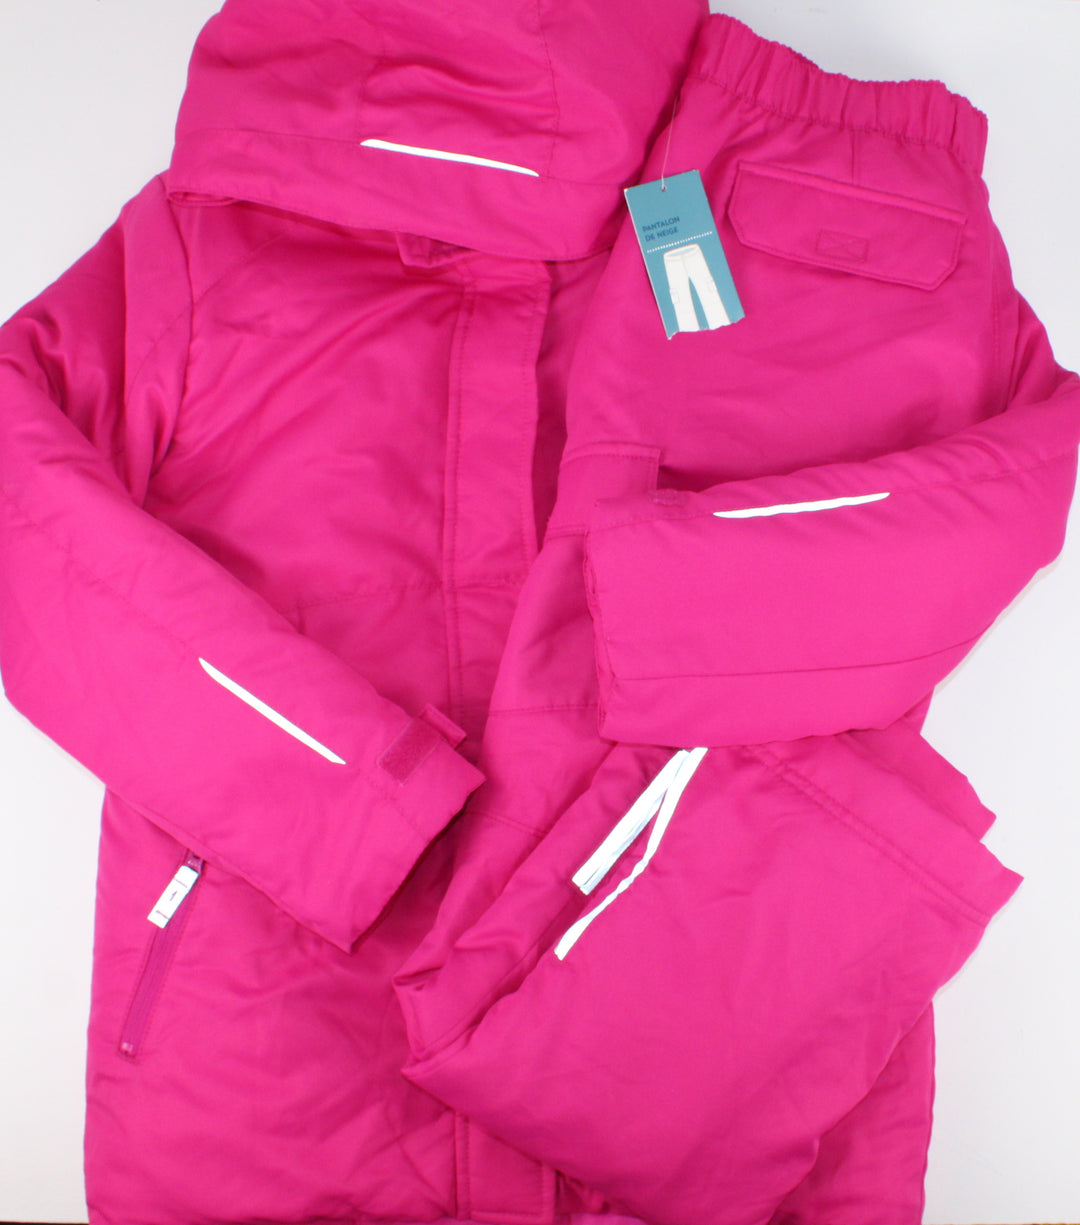 OLD NAVY PINK SNOWSUIT 14Y NEW WITH TAGS